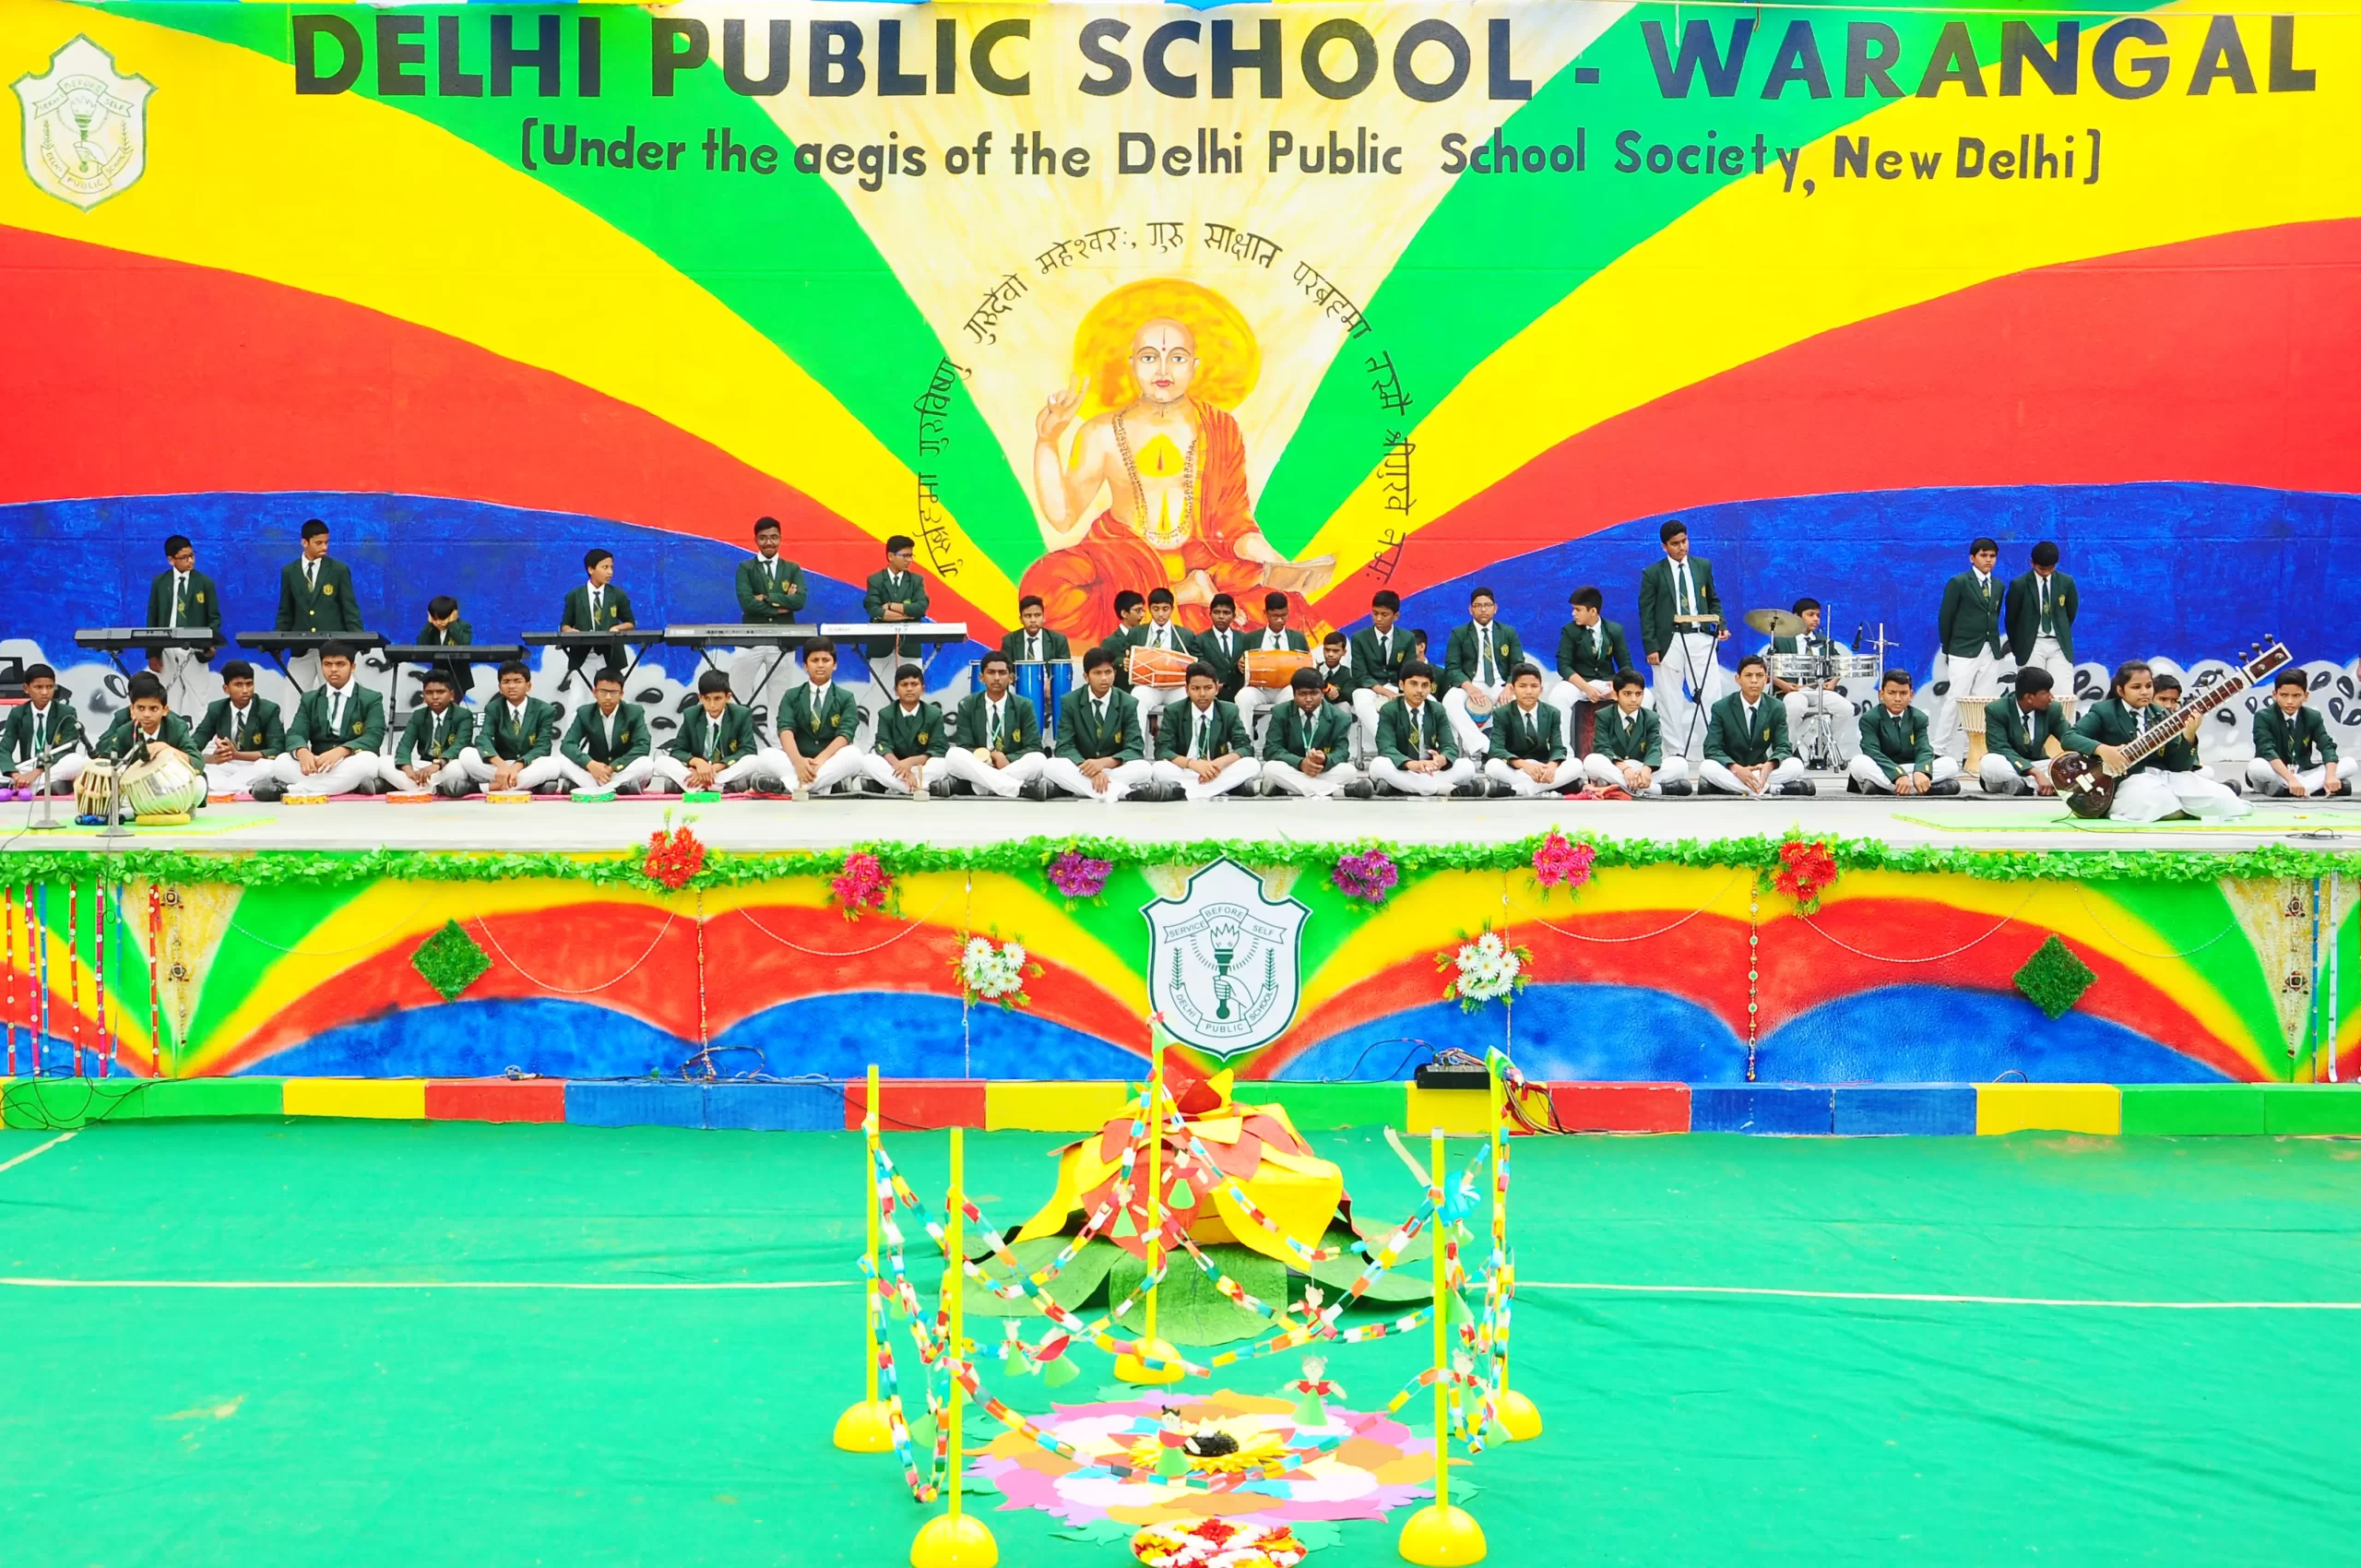 Students playing sitar, tabla, piano, and drums and performing on the occasion of Guru Purnima in DPS, Warangal